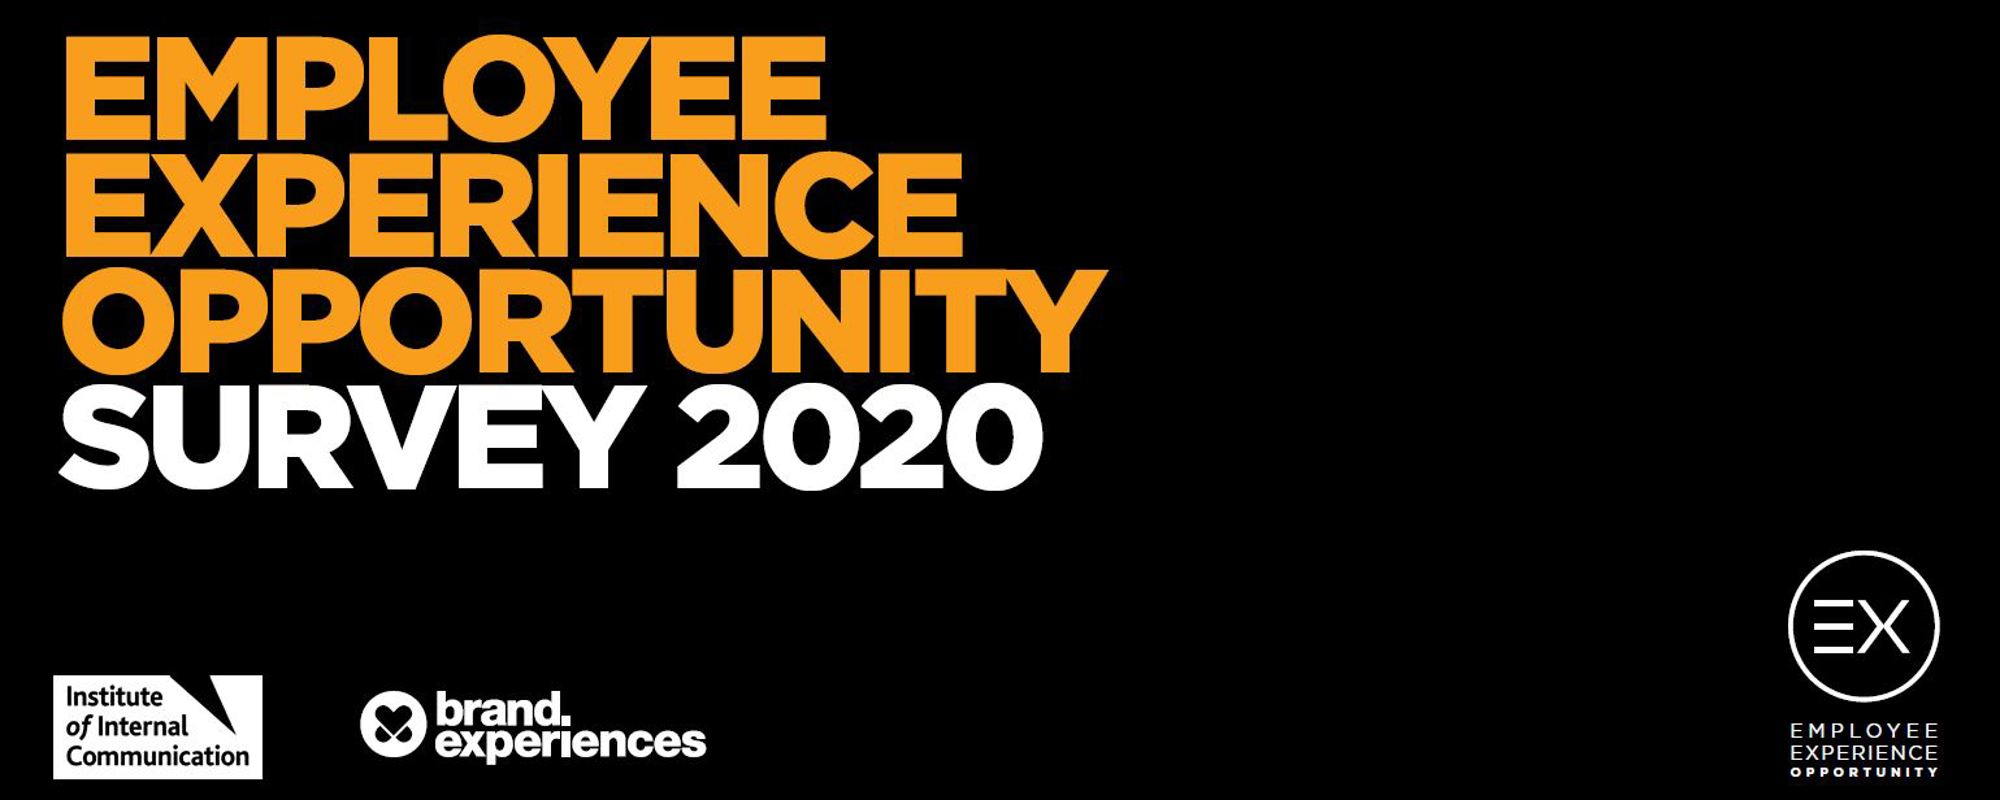 Employee Experience Opportunity survey 2020